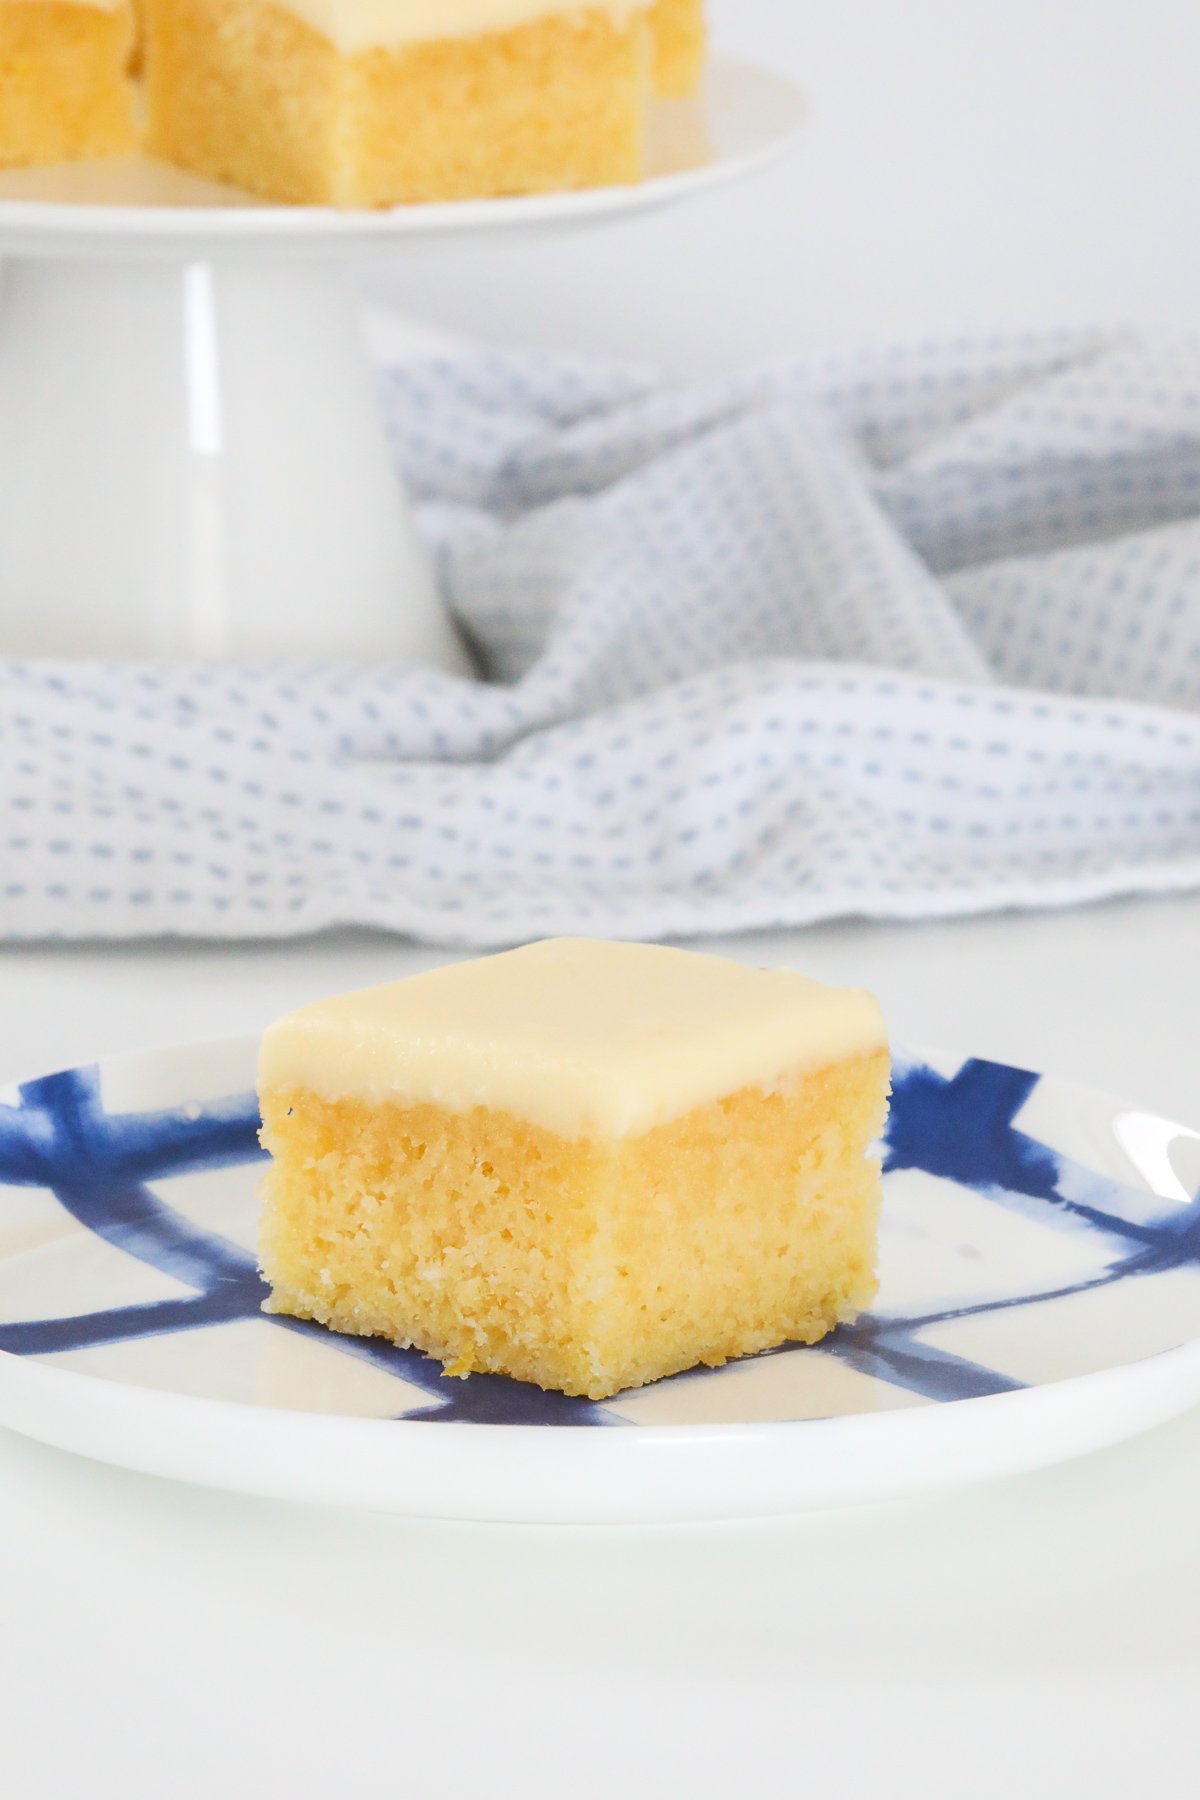 A piece of baked lemon slice on a blue and white plate, and a cake stand blurred in the background.